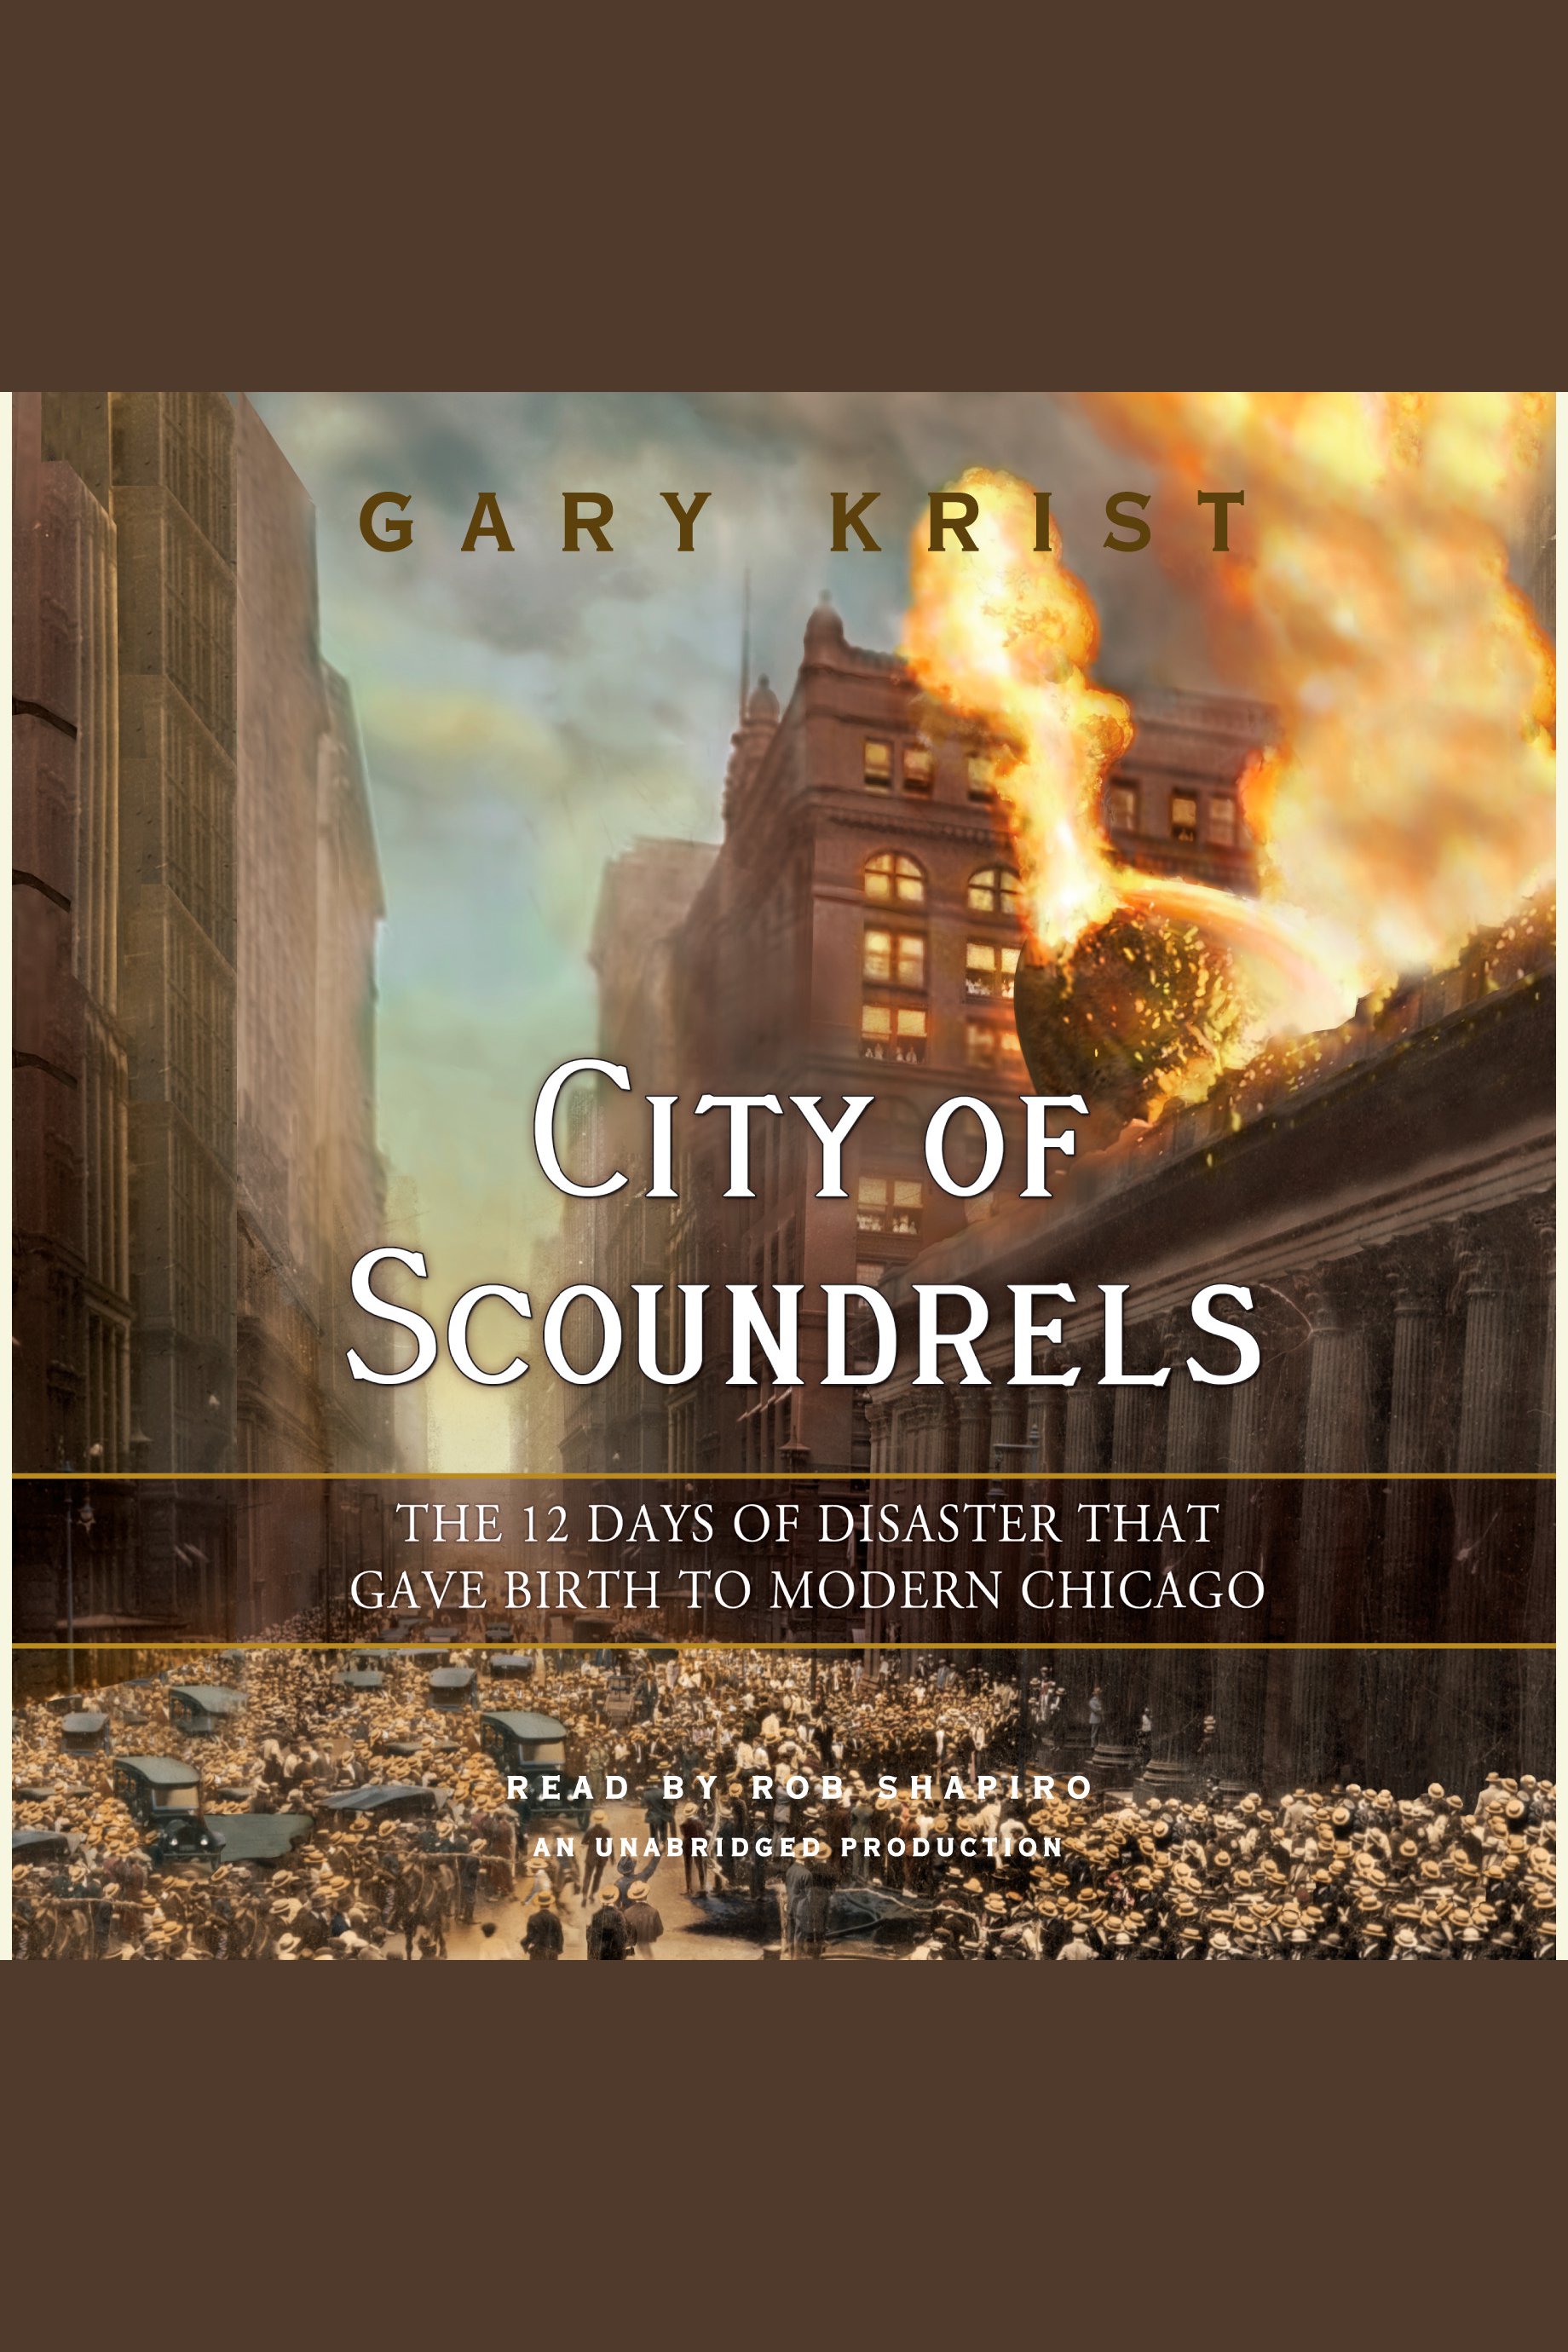 City of scoundrels the 12 days of disaster that gave birth to modern Chicago cover image